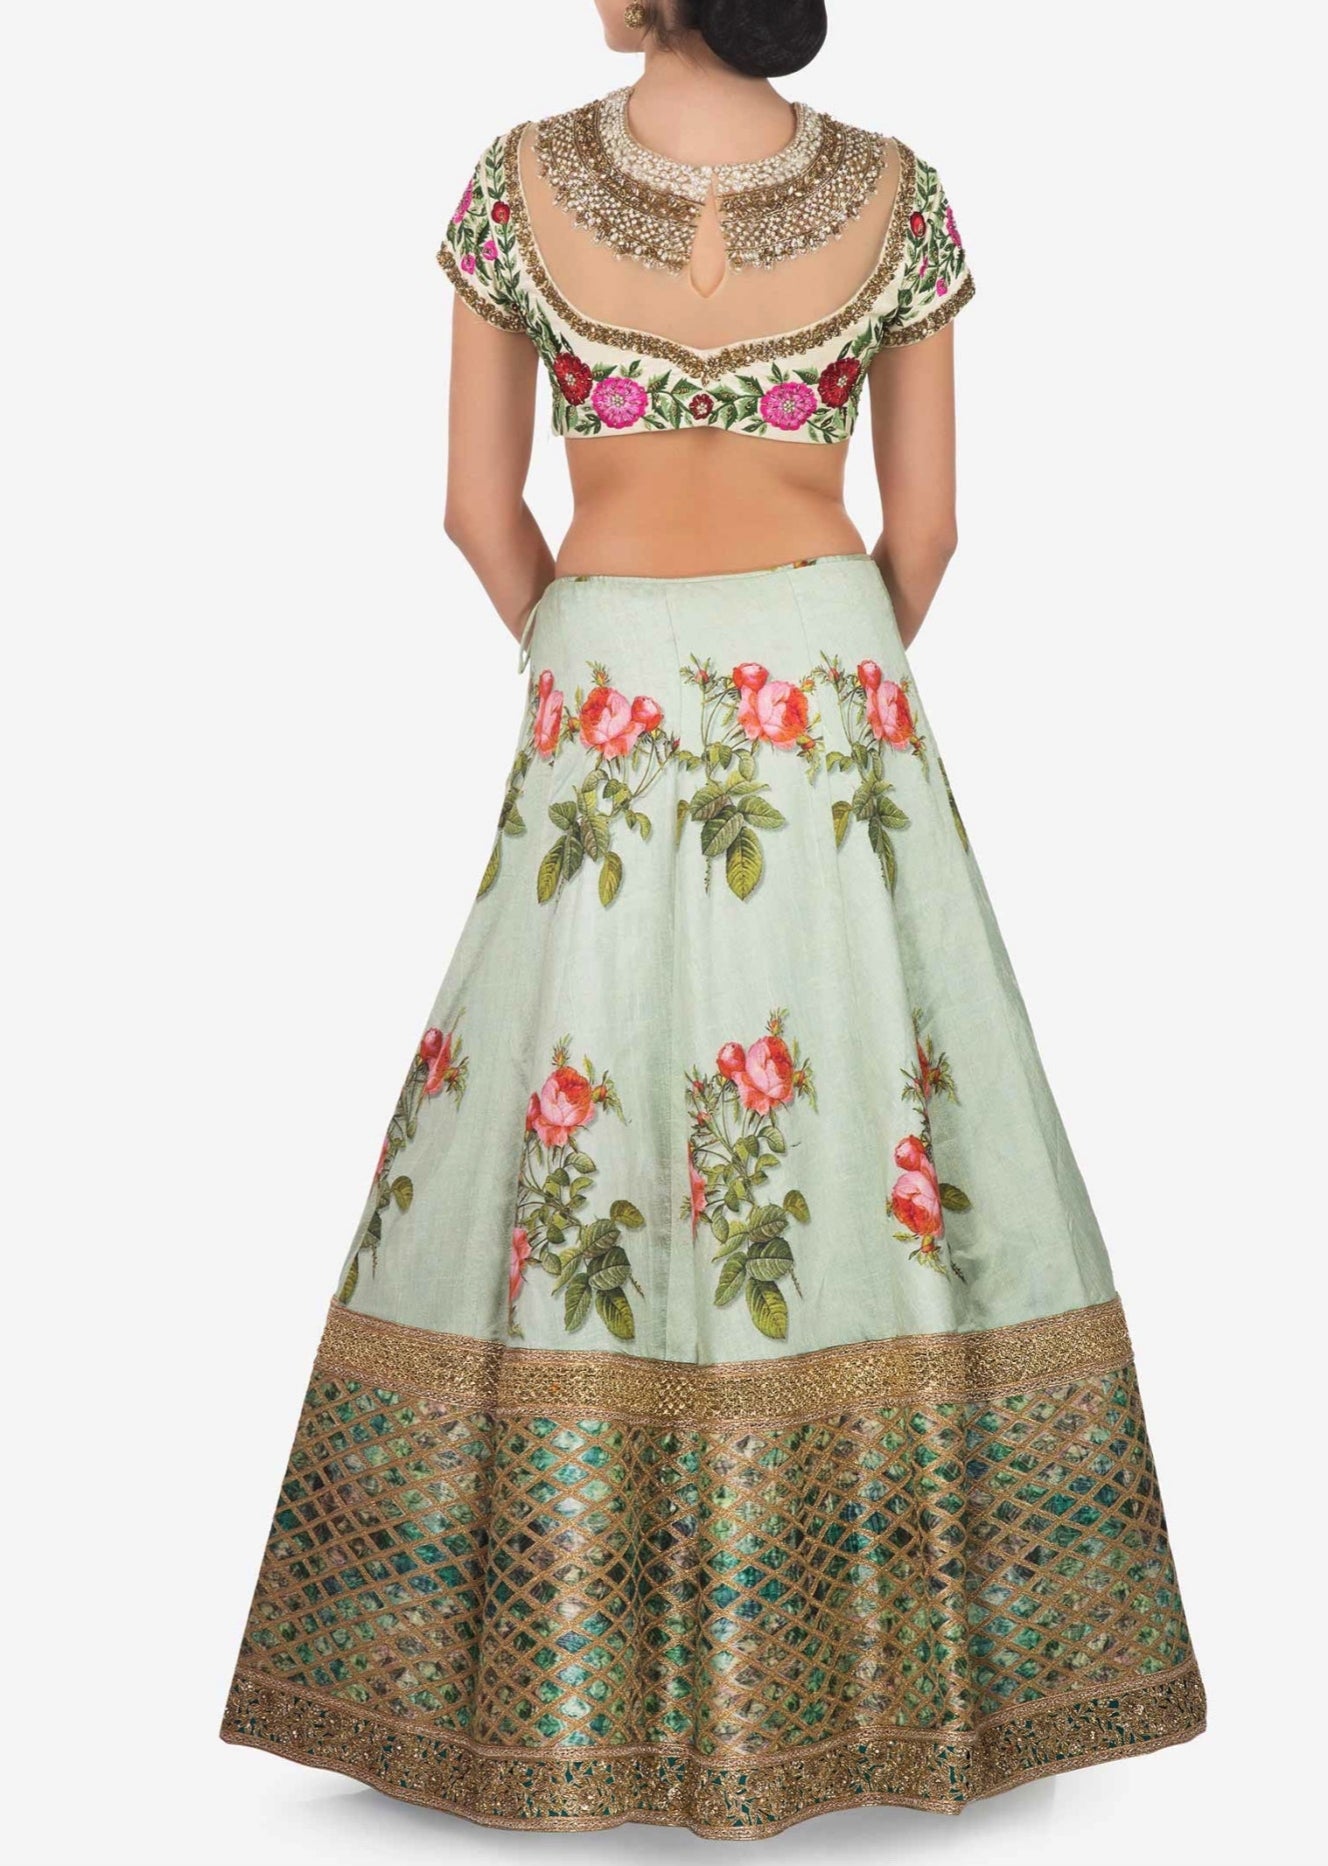 Mint blue lehenga in raw silk - Indian Clothing in Denver, CO, Aurora, CO, Boulder, CO, Fort Collins, CO, Colorado Springs, CO, Parker, CO, Highlands Ranch, CO, Cherry Creek, CO, Centennial, CO, and Longmont, CO. Nationwide shipping USA - India Fashion X